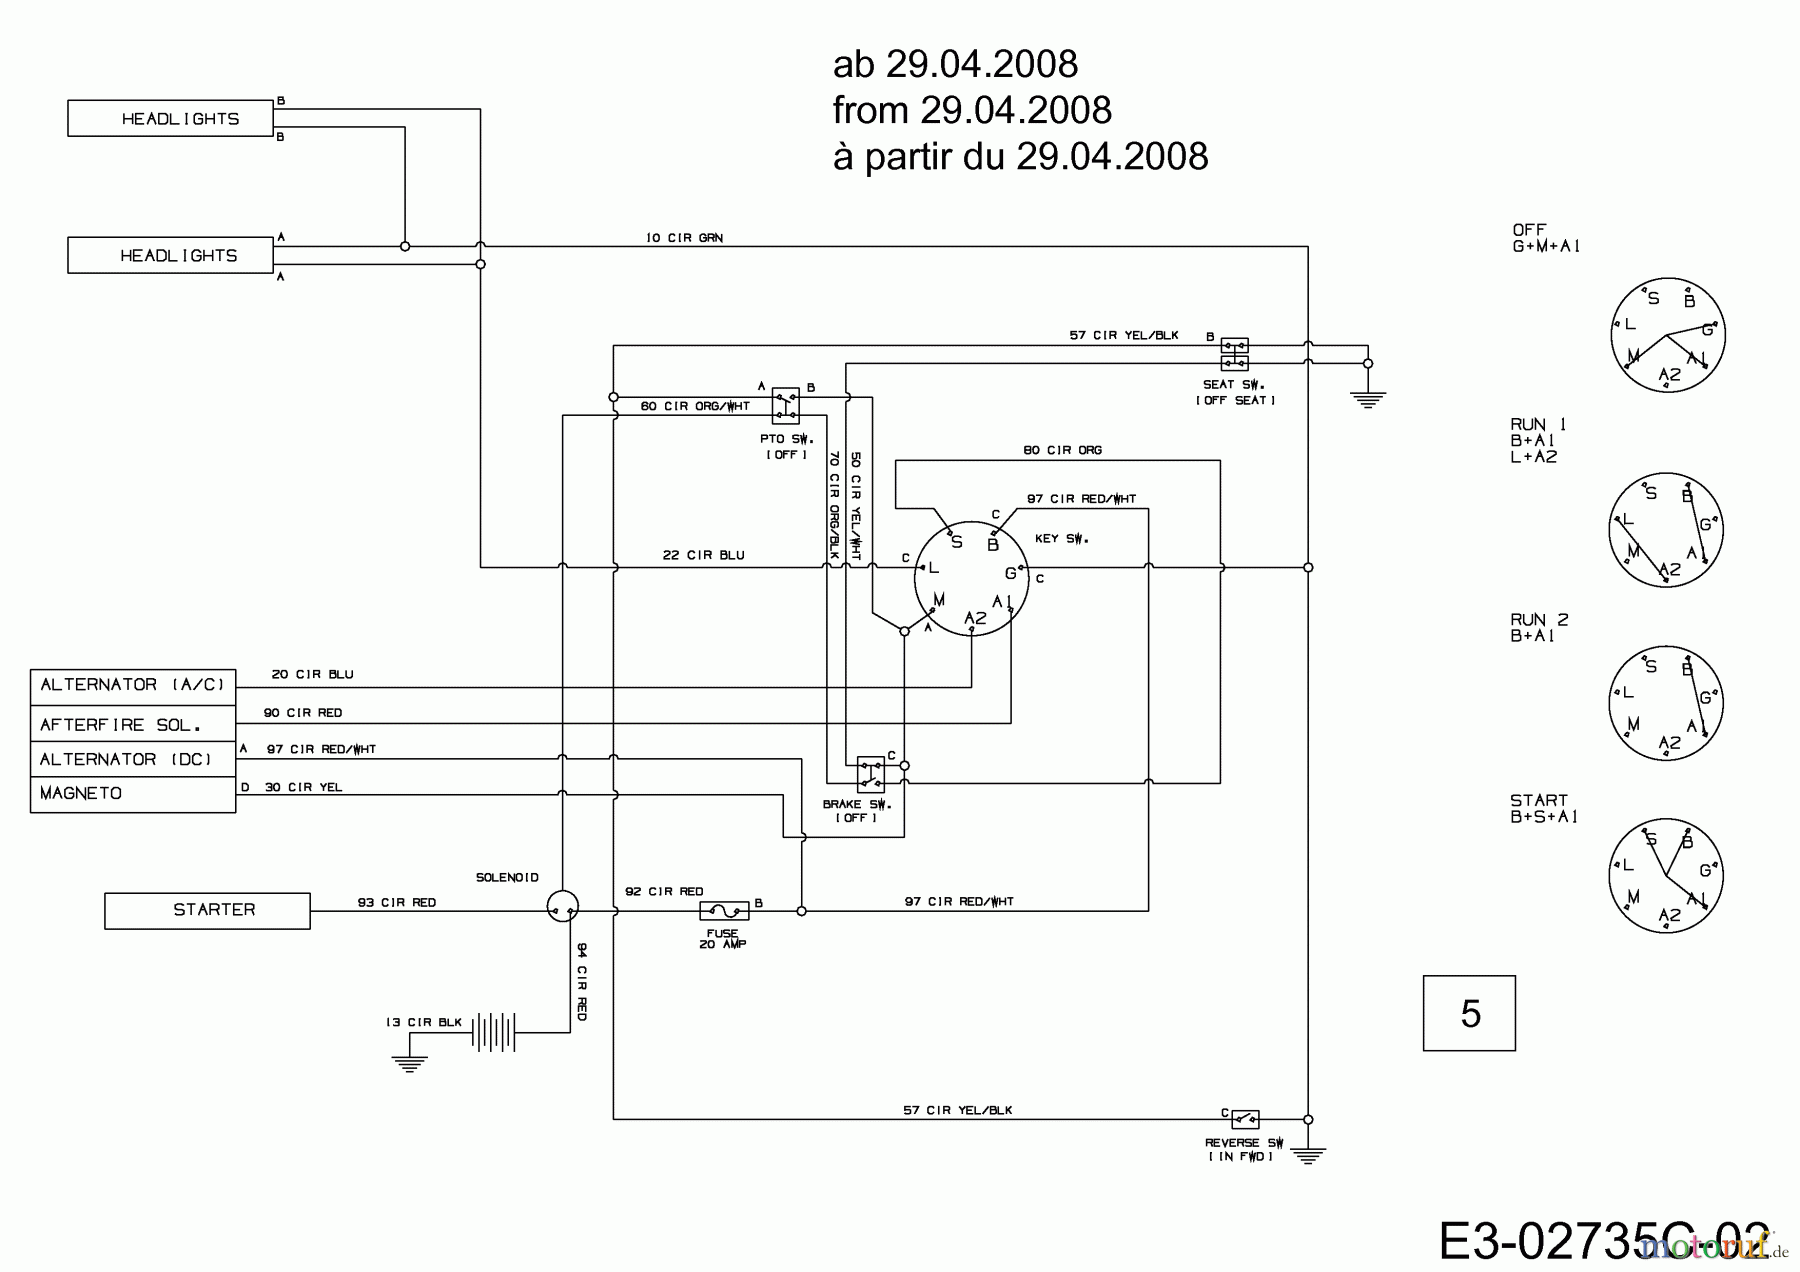  Silver Cut Lawn tractors SC 200/107 13AT793G612  (2008) Wiring diagram from 29.04.2008